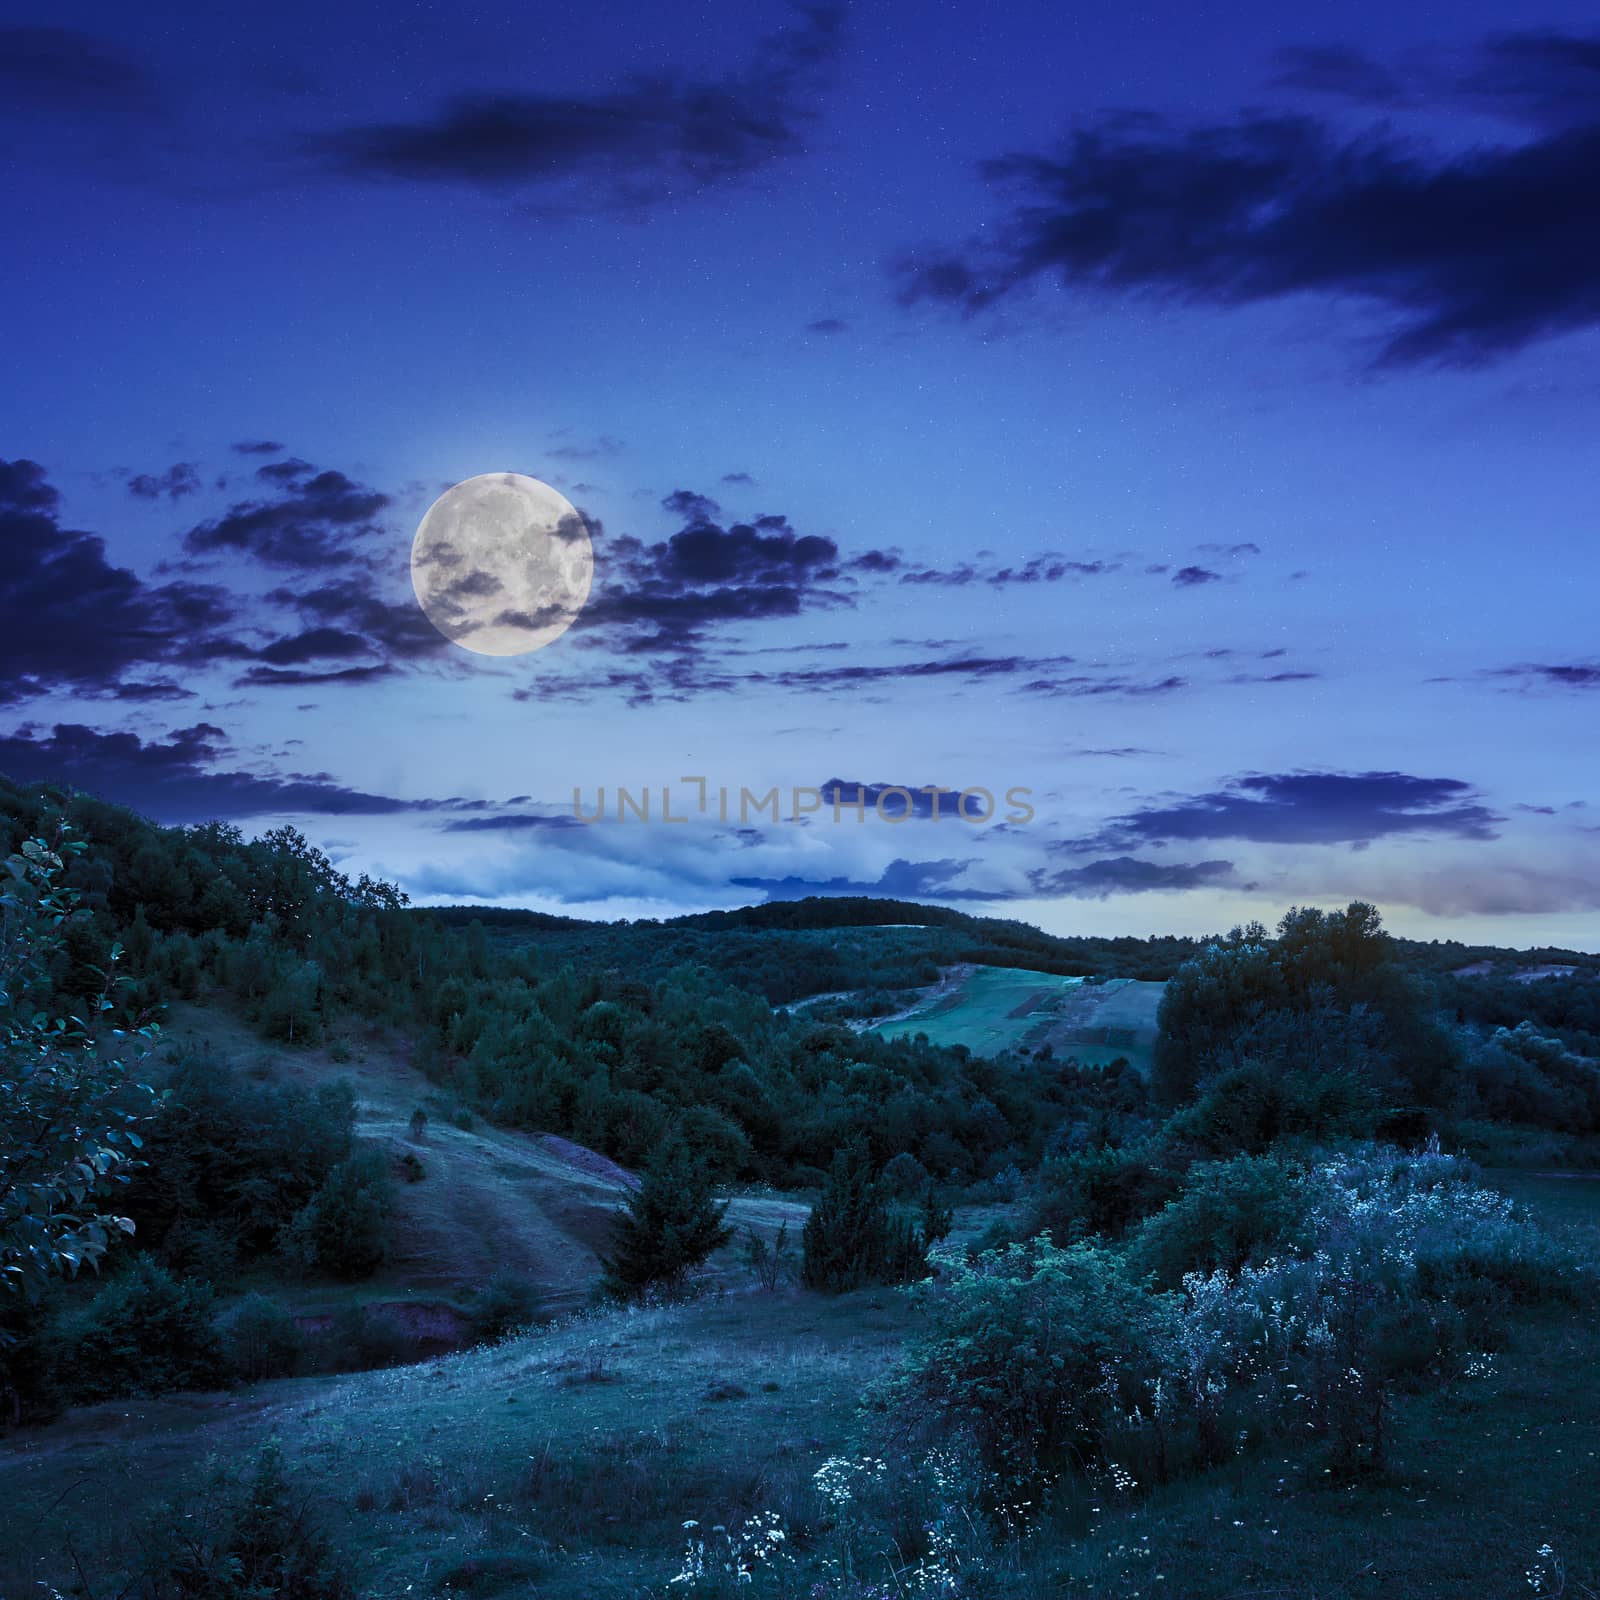 mountain summer landscape. trees near meadow and forest on hillside under  sky with clouds at night in moon light